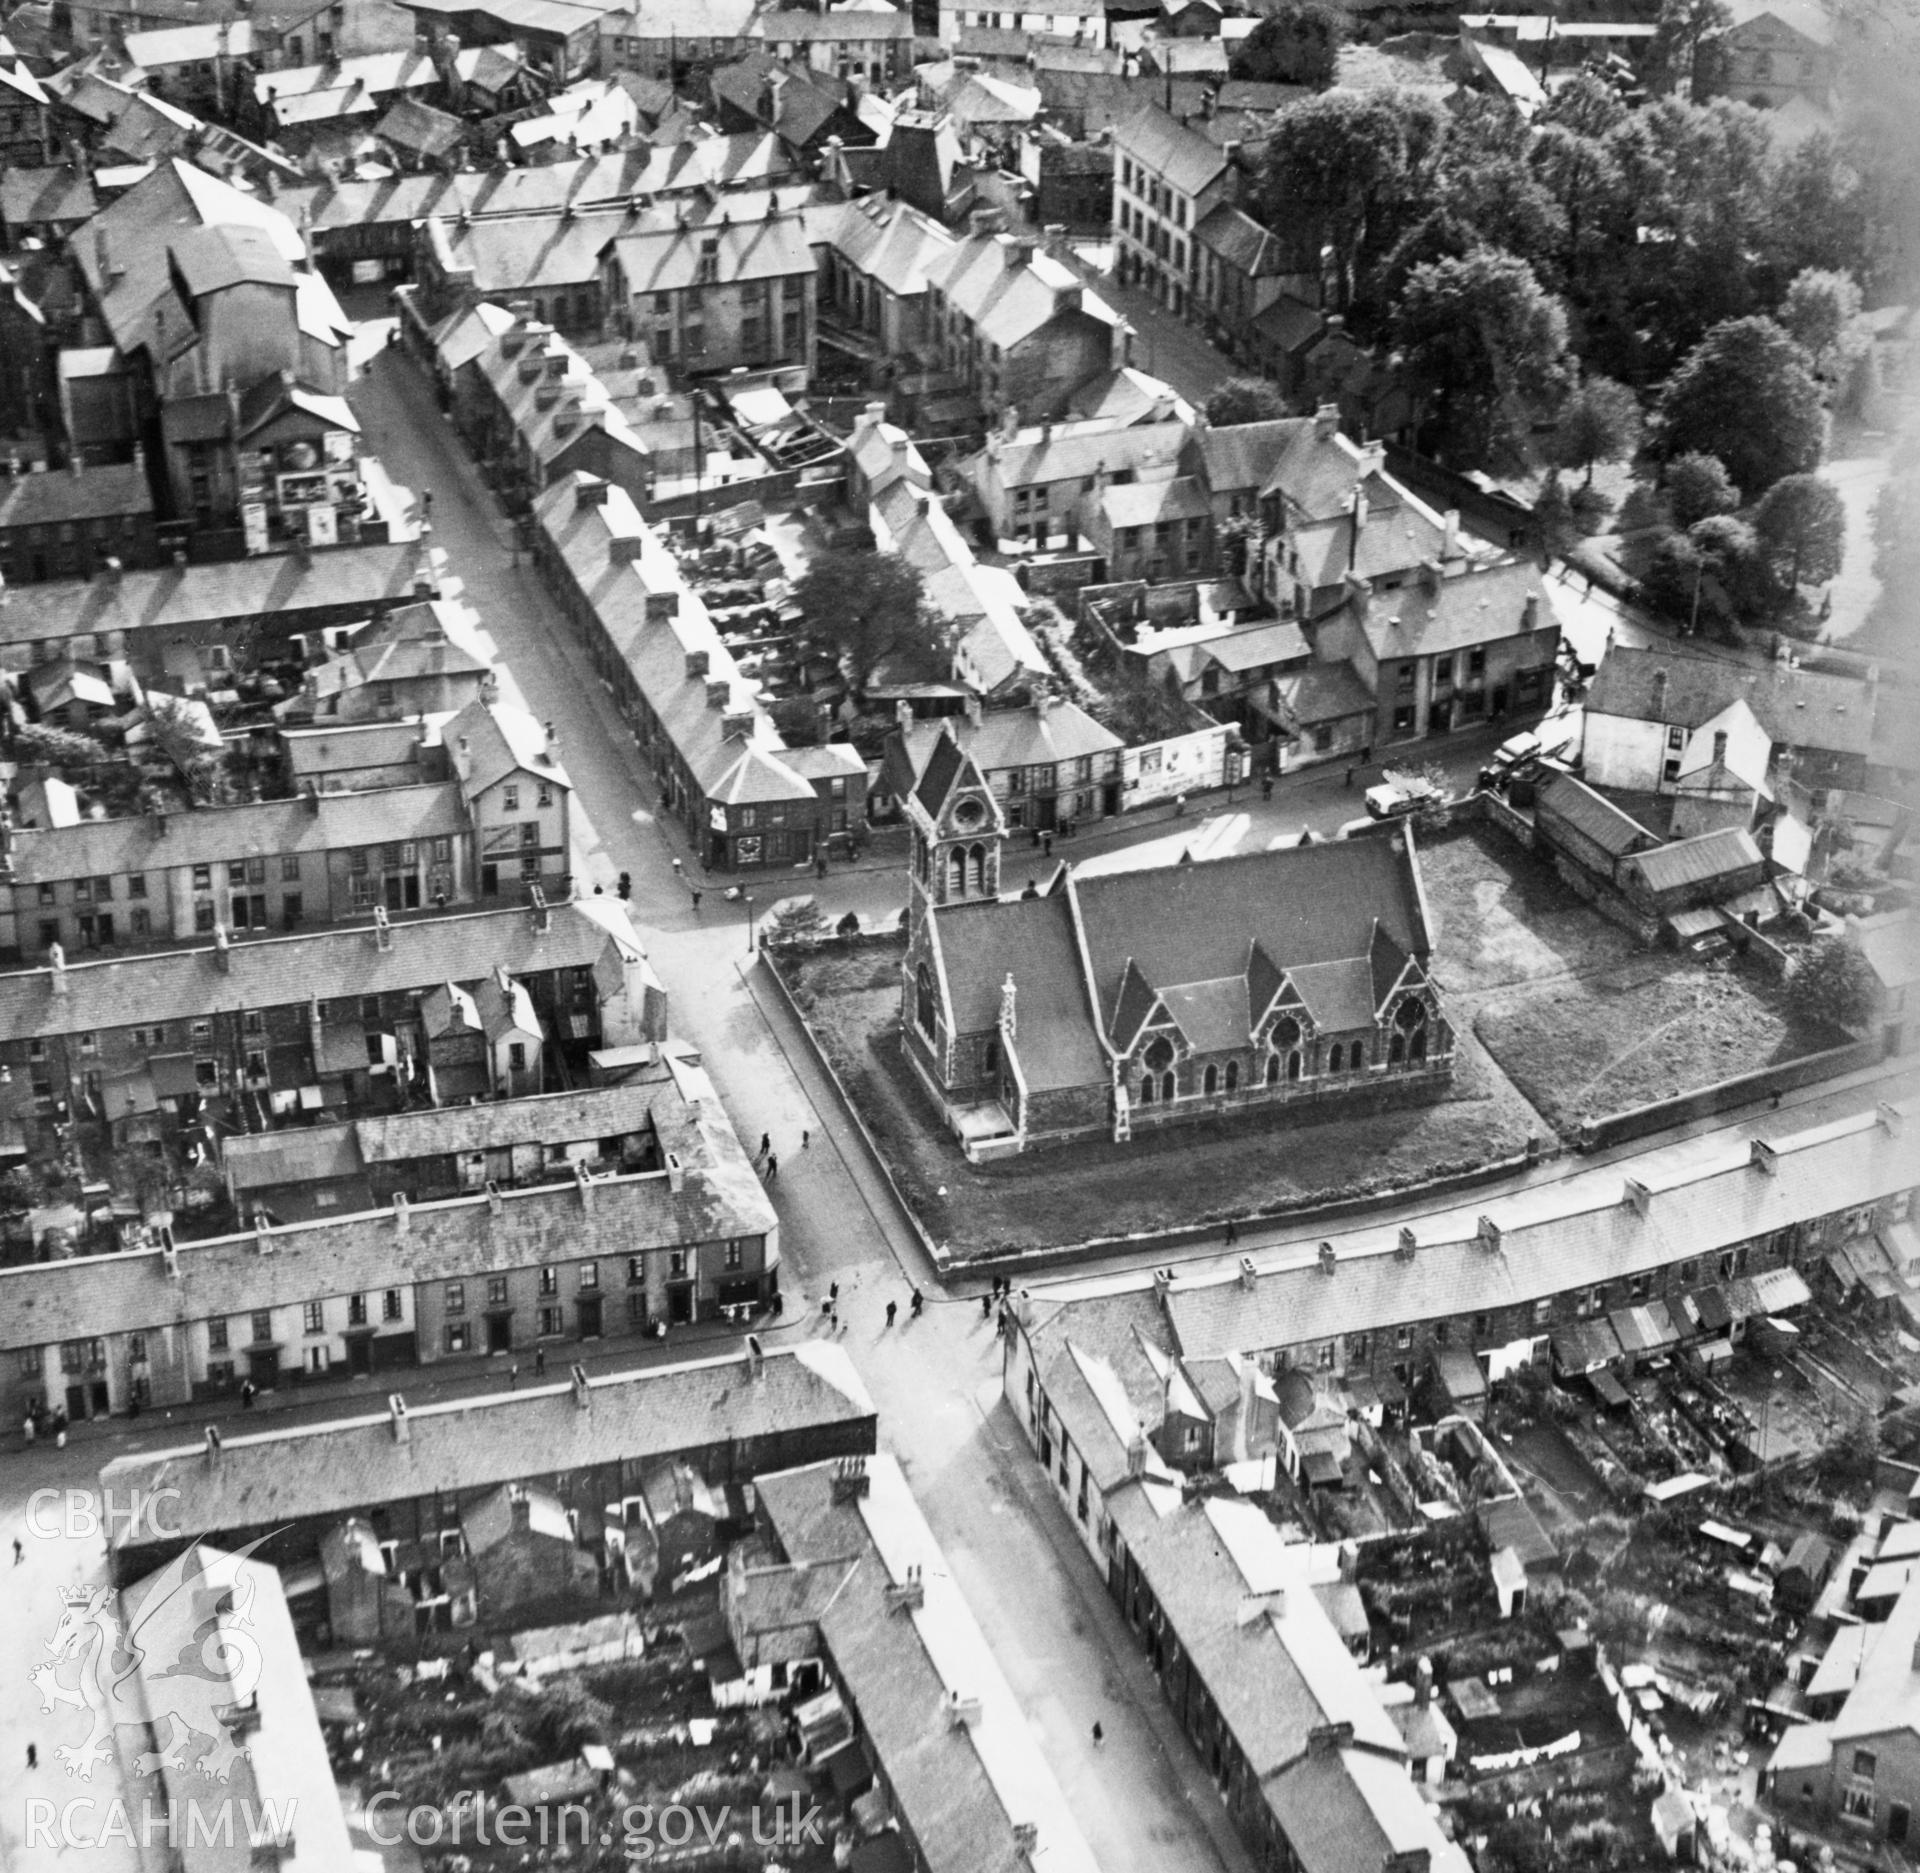 View of Aberdare showing St Mary's church. Oblique aerial photograph, 5?x4? BW glass plate.